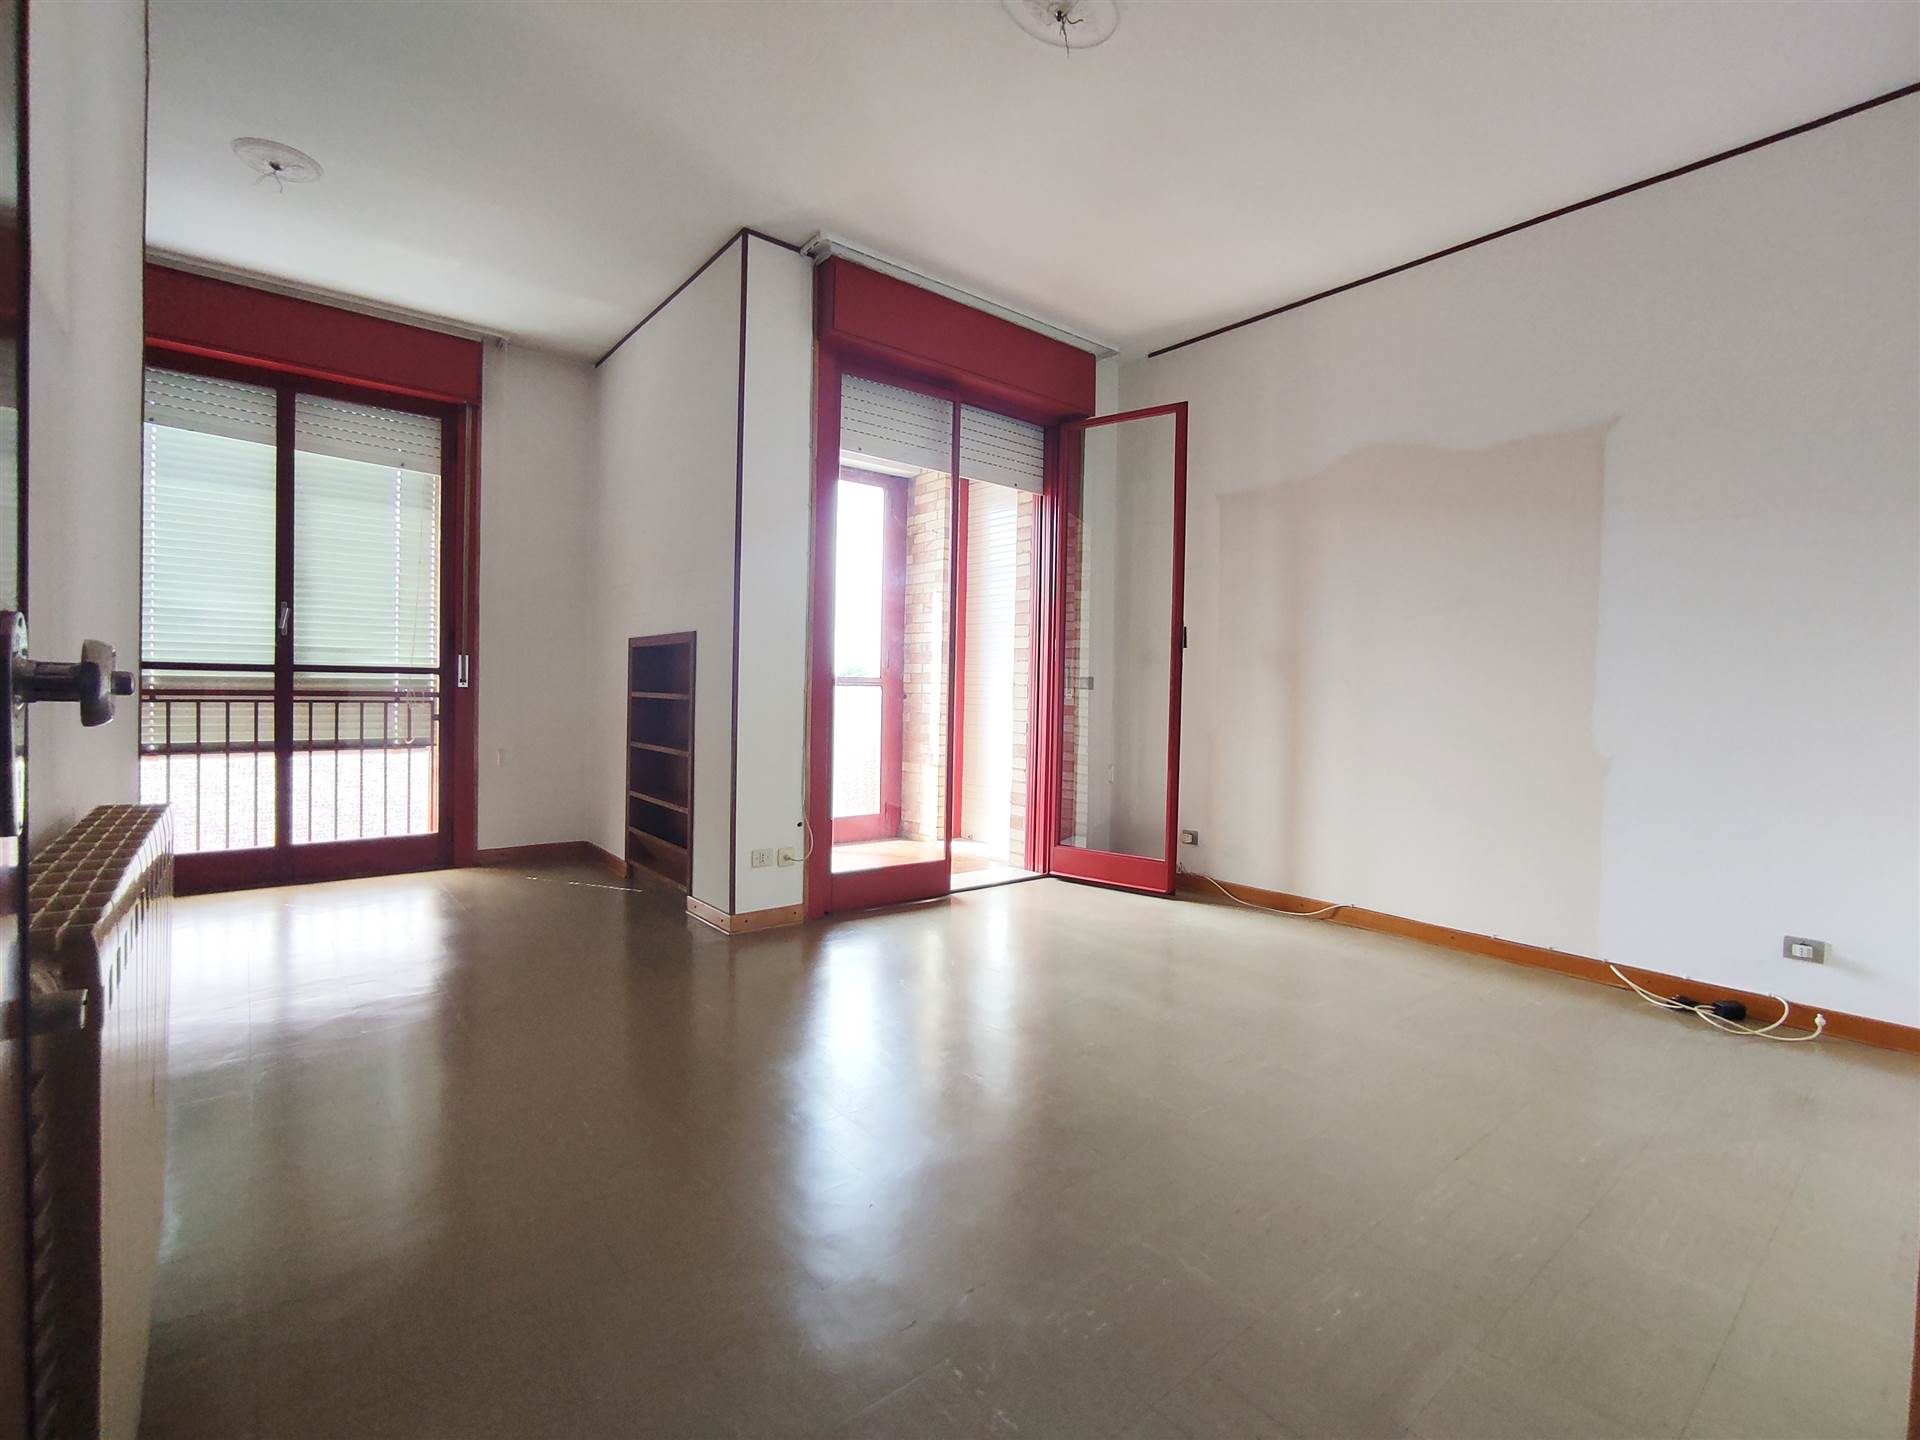 PORTOGRUARO, Apartment for sale of 110 Sq. mt., Habitable, Energetic class: F, placed at 3° on 3, composed by: 6 Rooms, Separate kitchen, , 3 Bedrooms, 2 Bathrooms, Single Box, Terrace, Price: € 85,